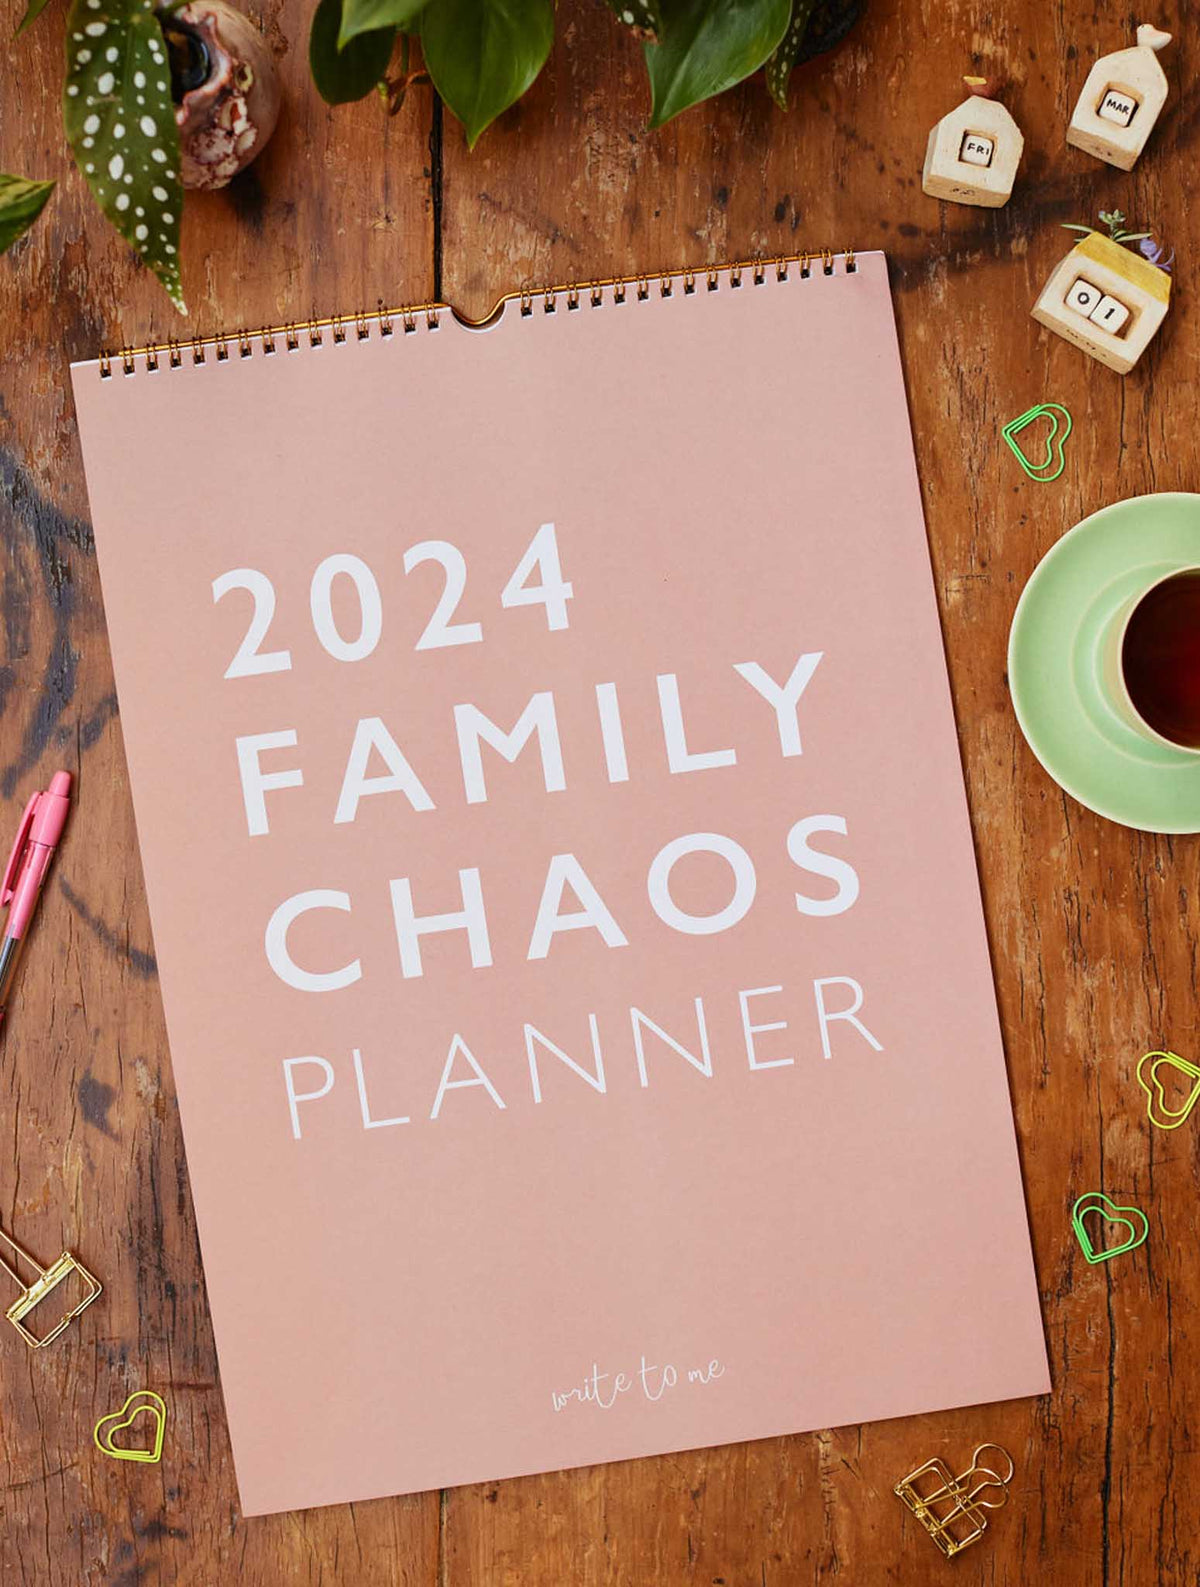 2024 Family Chaos Planner - Write To Me US